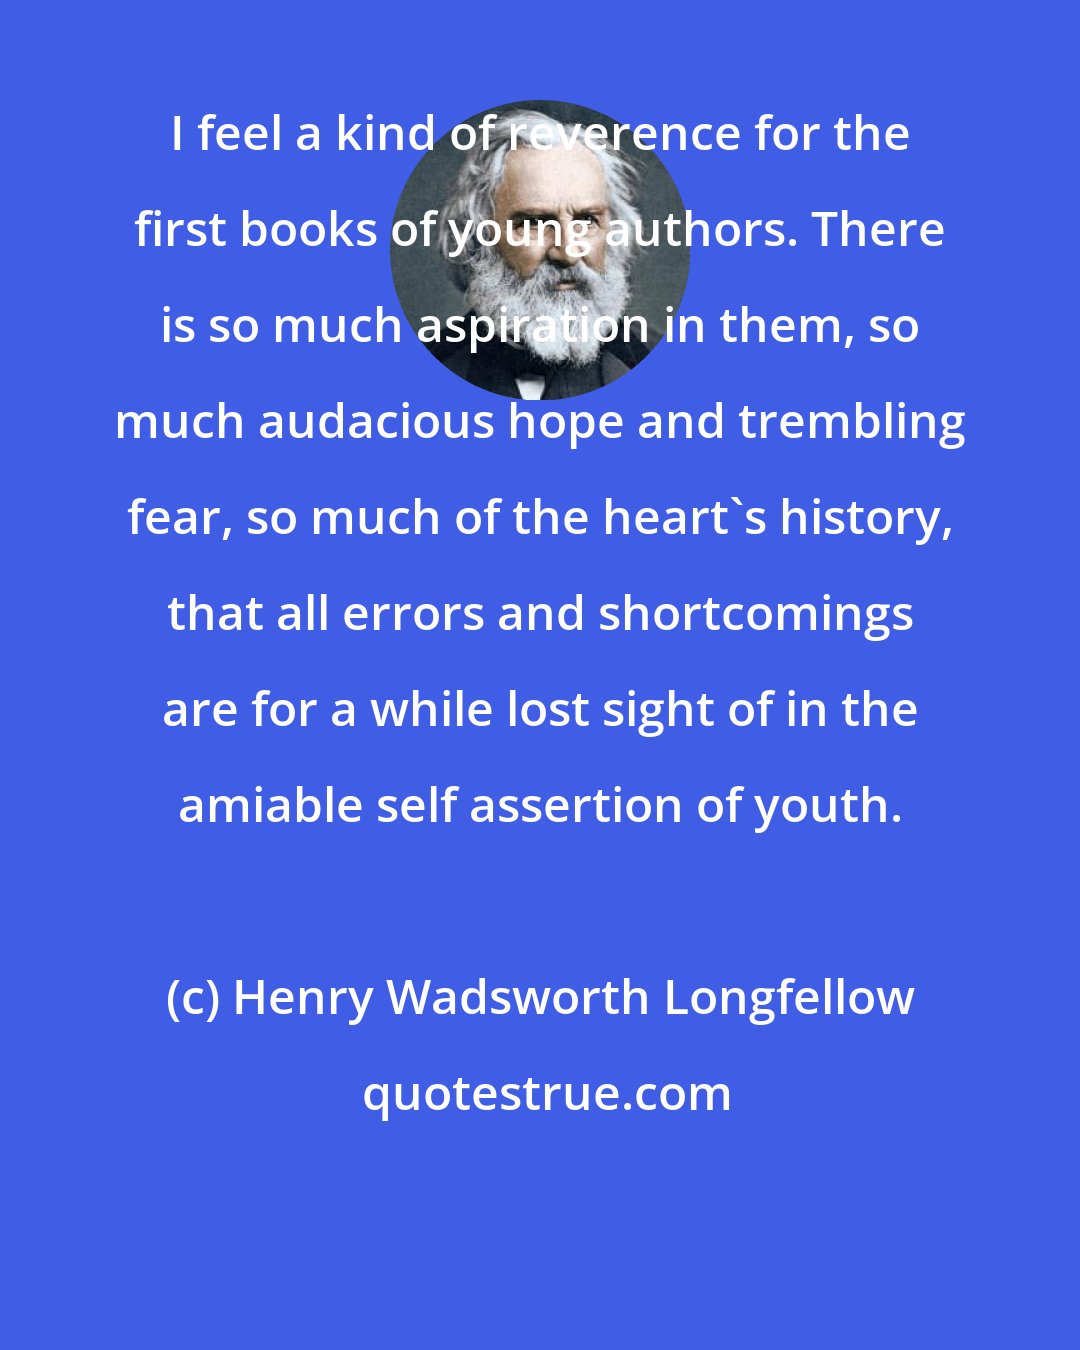 Henry Wadsworth Longfellow: I feel a kind of reverence for the first books of young authors. There is so much aspiration in them, so much audacious hope and trembling fear, so much of the heart's history, that all errors and shortcomings are for a while lost sight of in the amiable self assertion of youth.